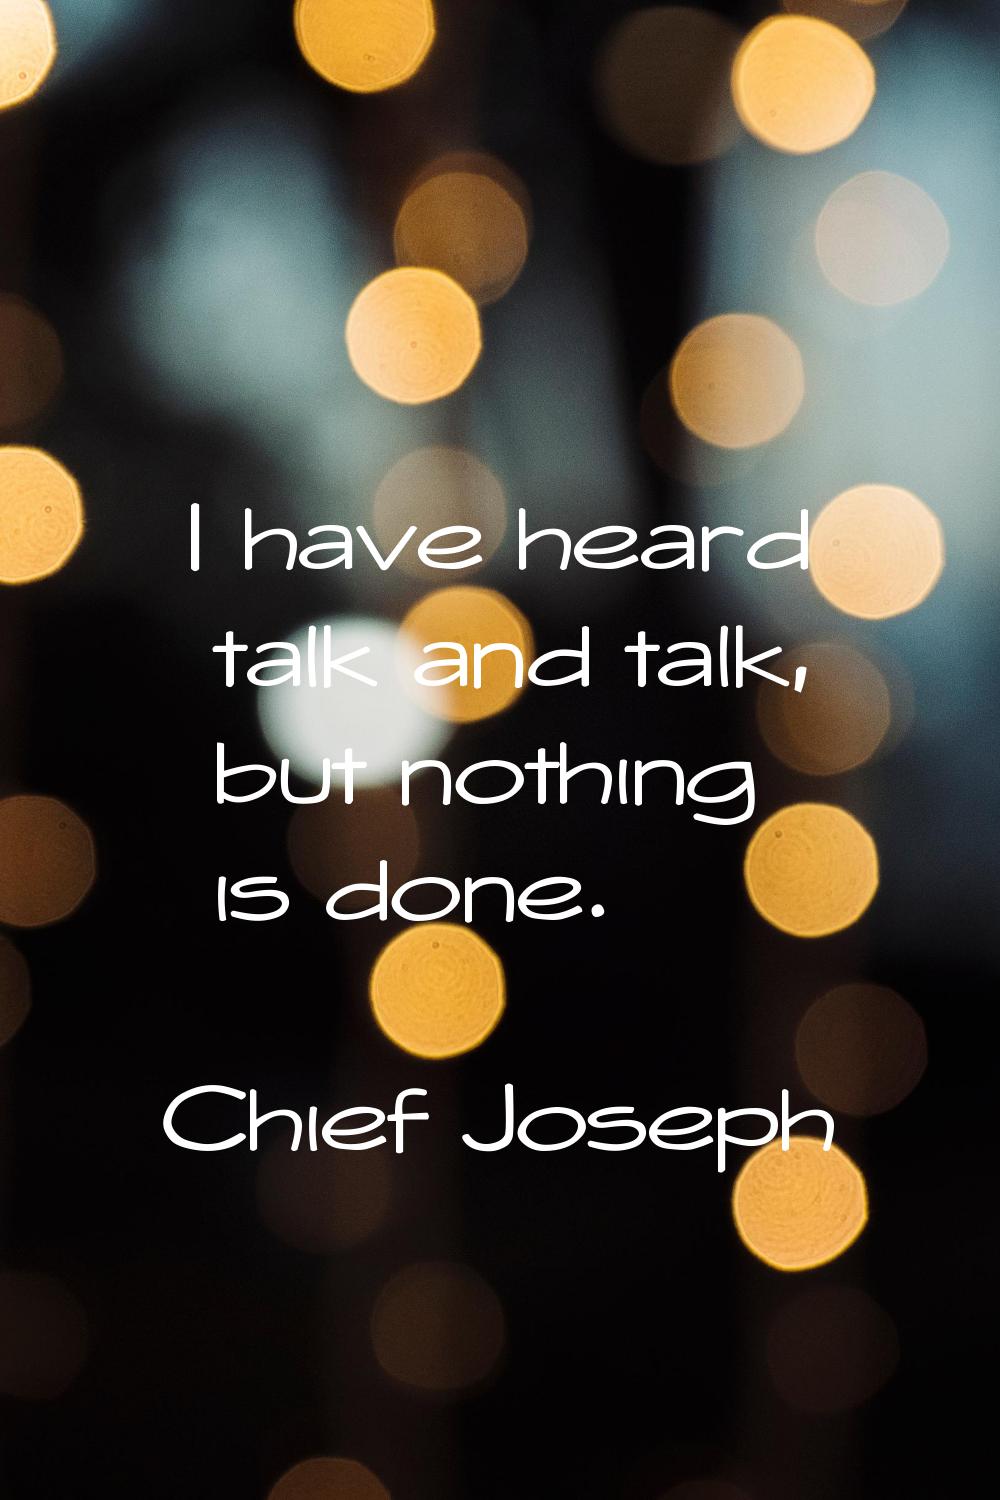 I have heard talk and talk, but nothing is done.